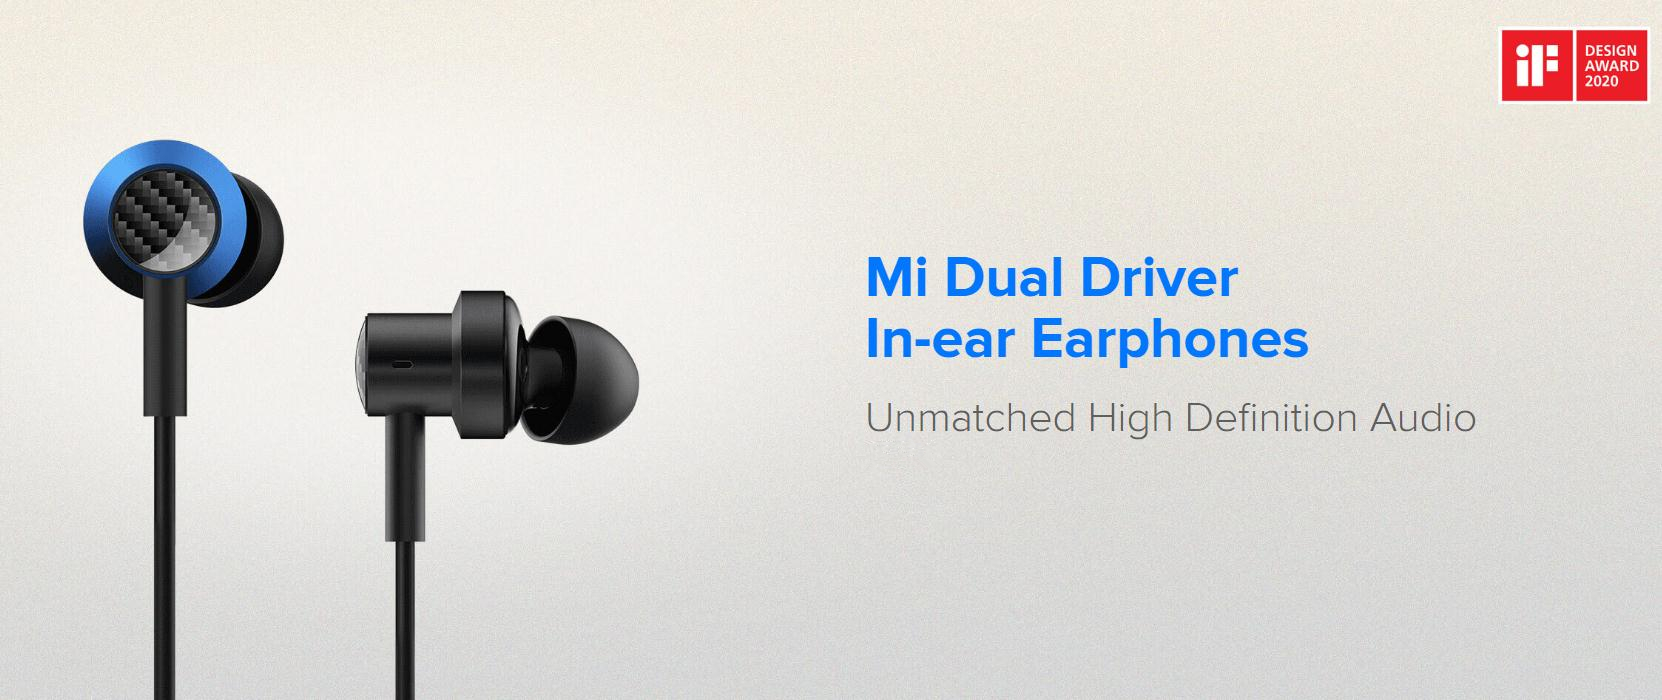 Xiaomi 3.5mm Dual Dynamic Drivers Earphones HiFi Deep Bass Wired Control Magnetic Earbuds with Mic - Blue